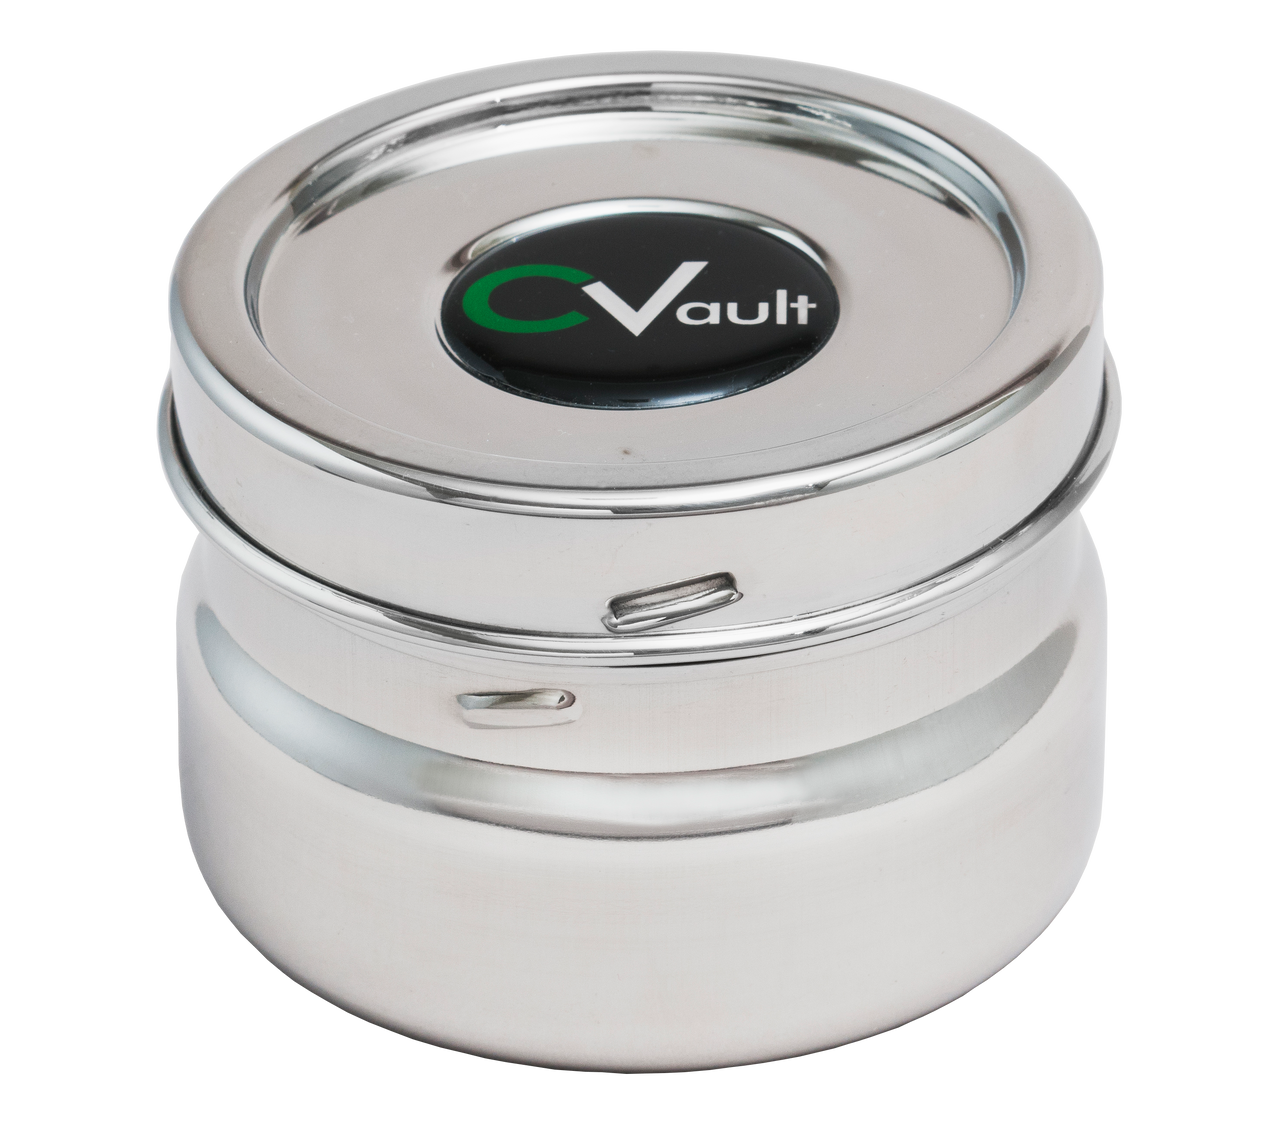 CVault - Small 1/2 OZ. Airtight Stainless Steel Storage Container open lid.